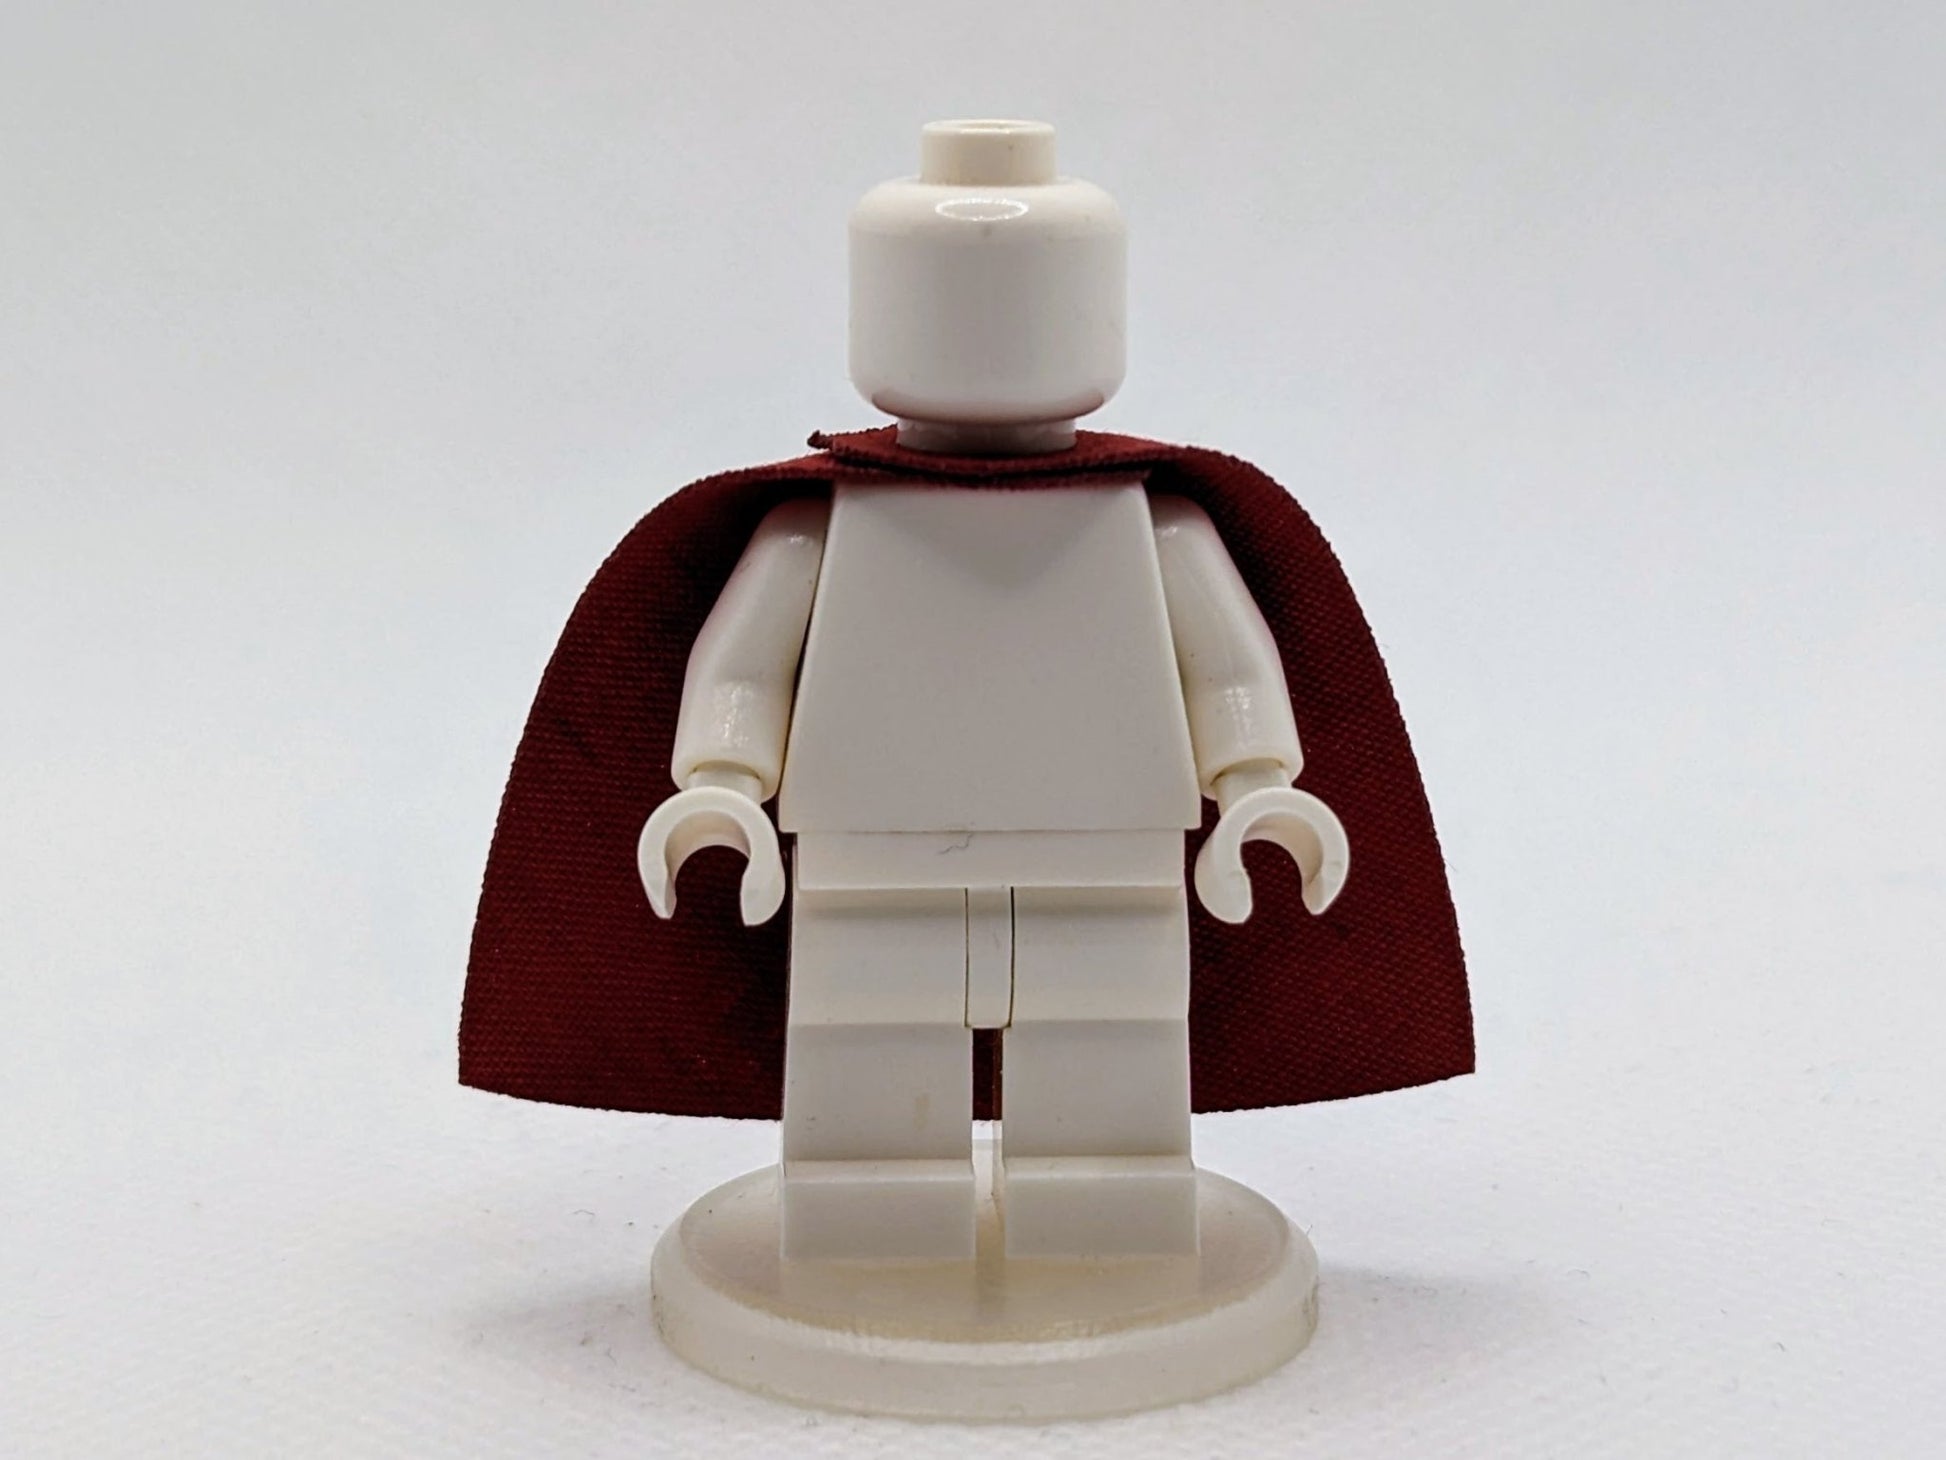 Standard Cape by capes4minifigs - RPGminifigs